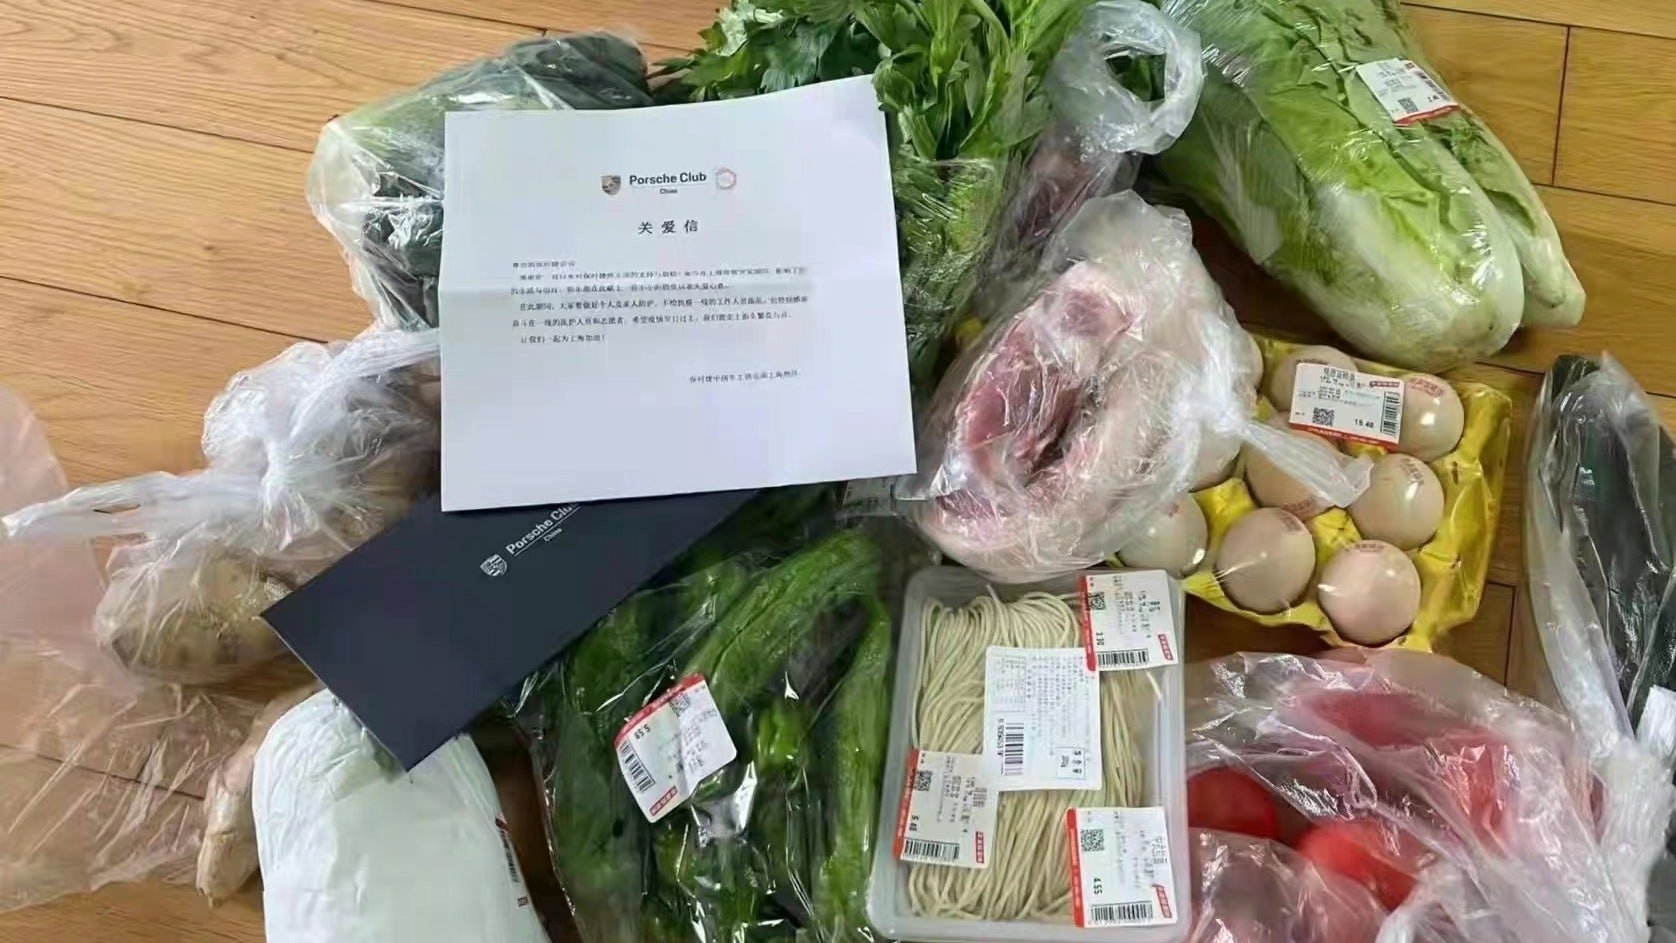 As cities return to lockdown in China, fresh food is the latest item trending online. Amid the dark humor, how can luxury brands connect with citizens? Photo: Weibo